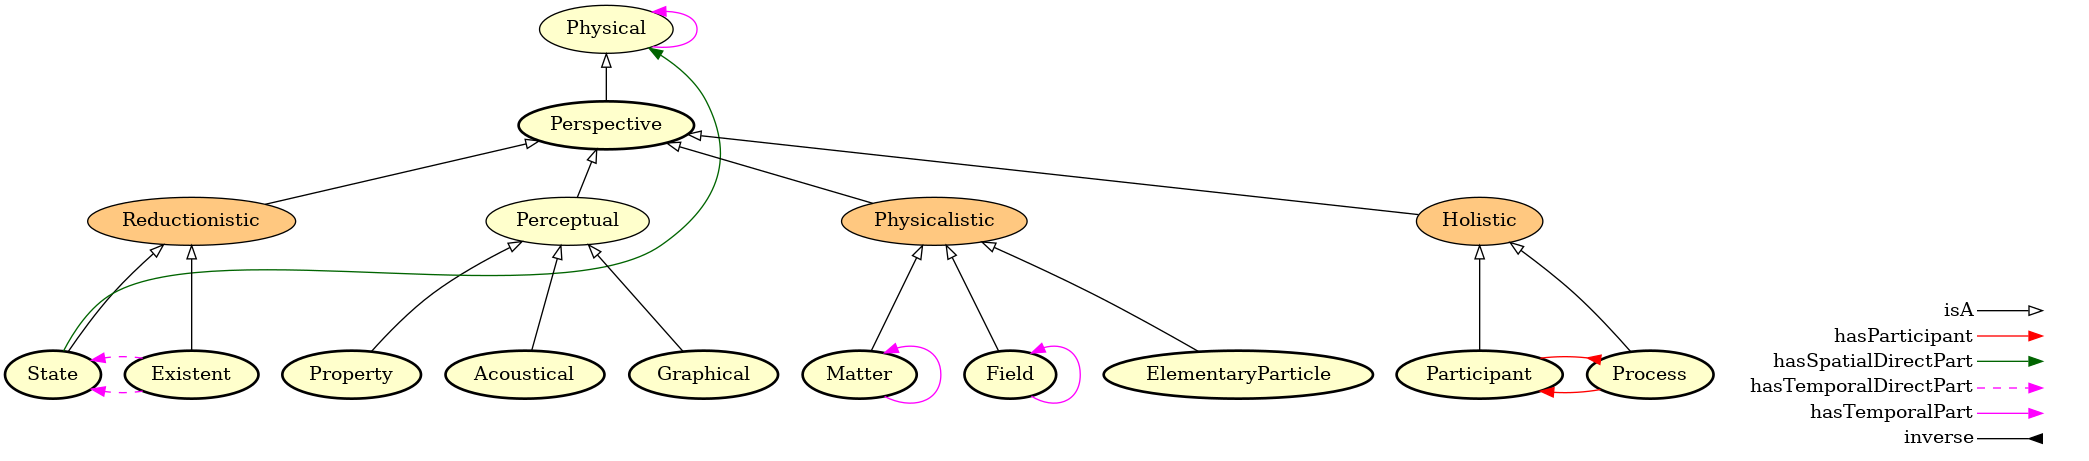 Figure 2. The EMMO perspectives.